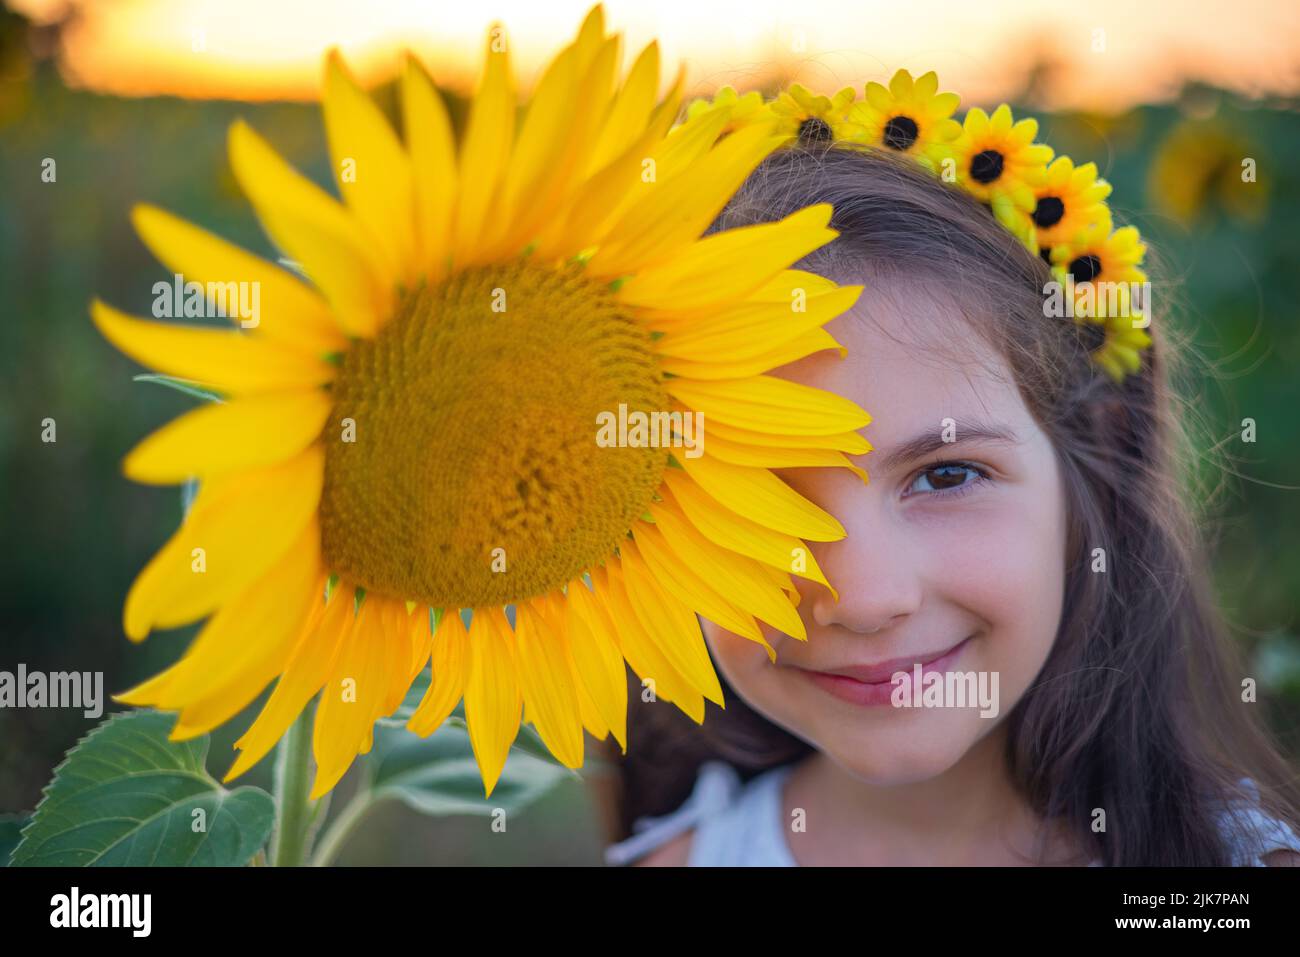 Girl and sunflowers in sunflower field during sunset. Agriculture, farming, childhood and carefree concept. Stock Photo